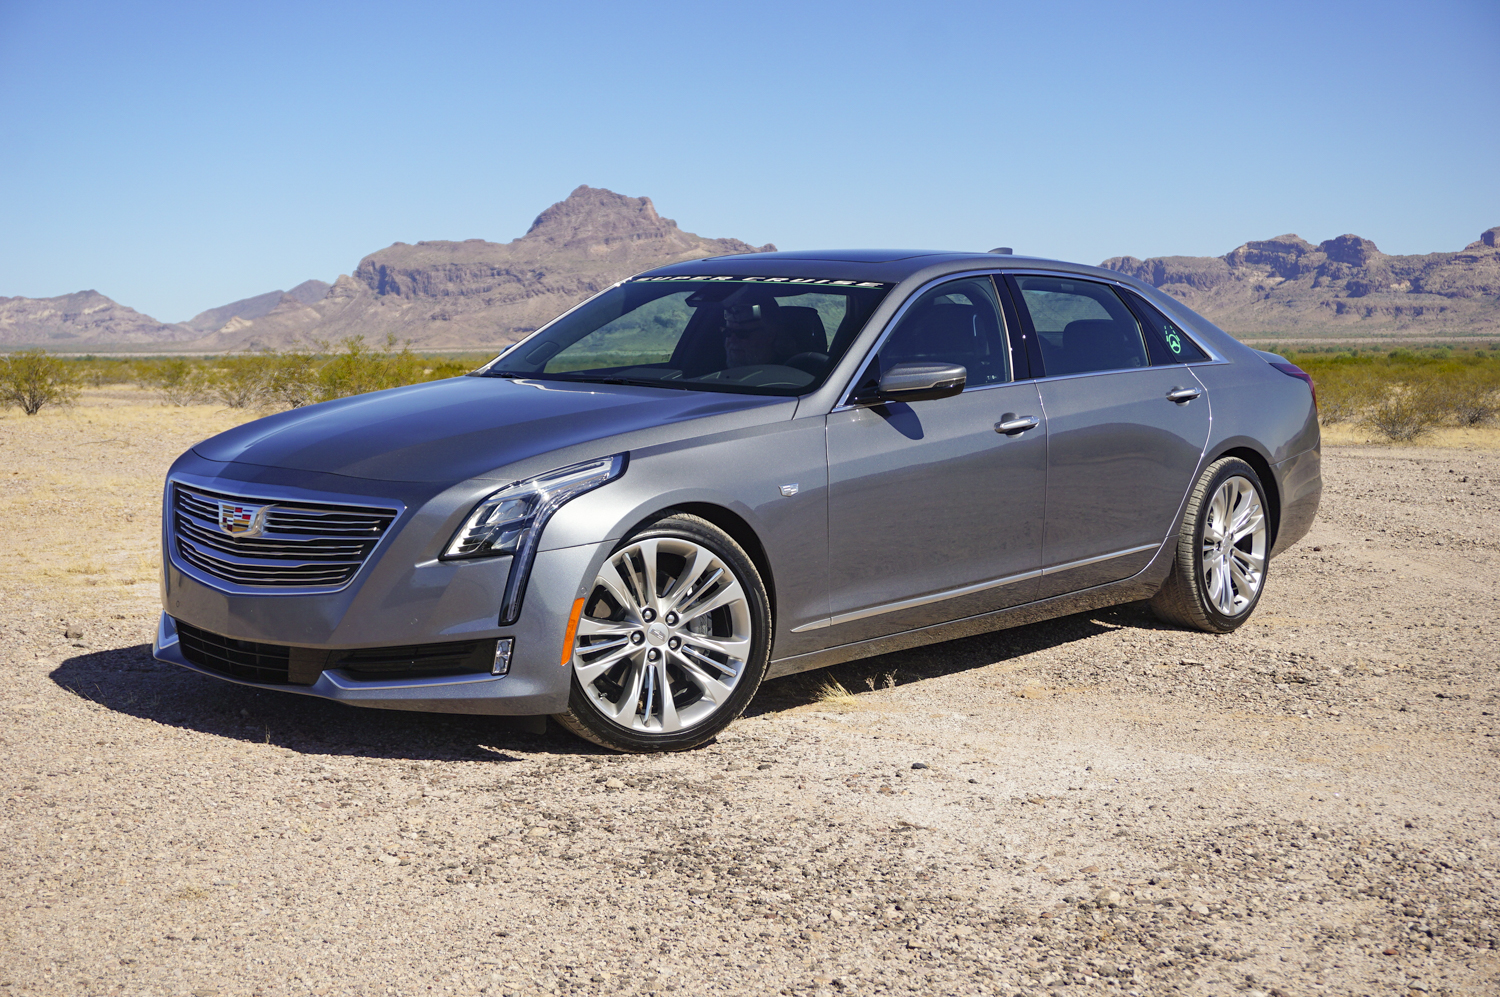 2018 Cadillac CT6 first drive review | Digital Trends